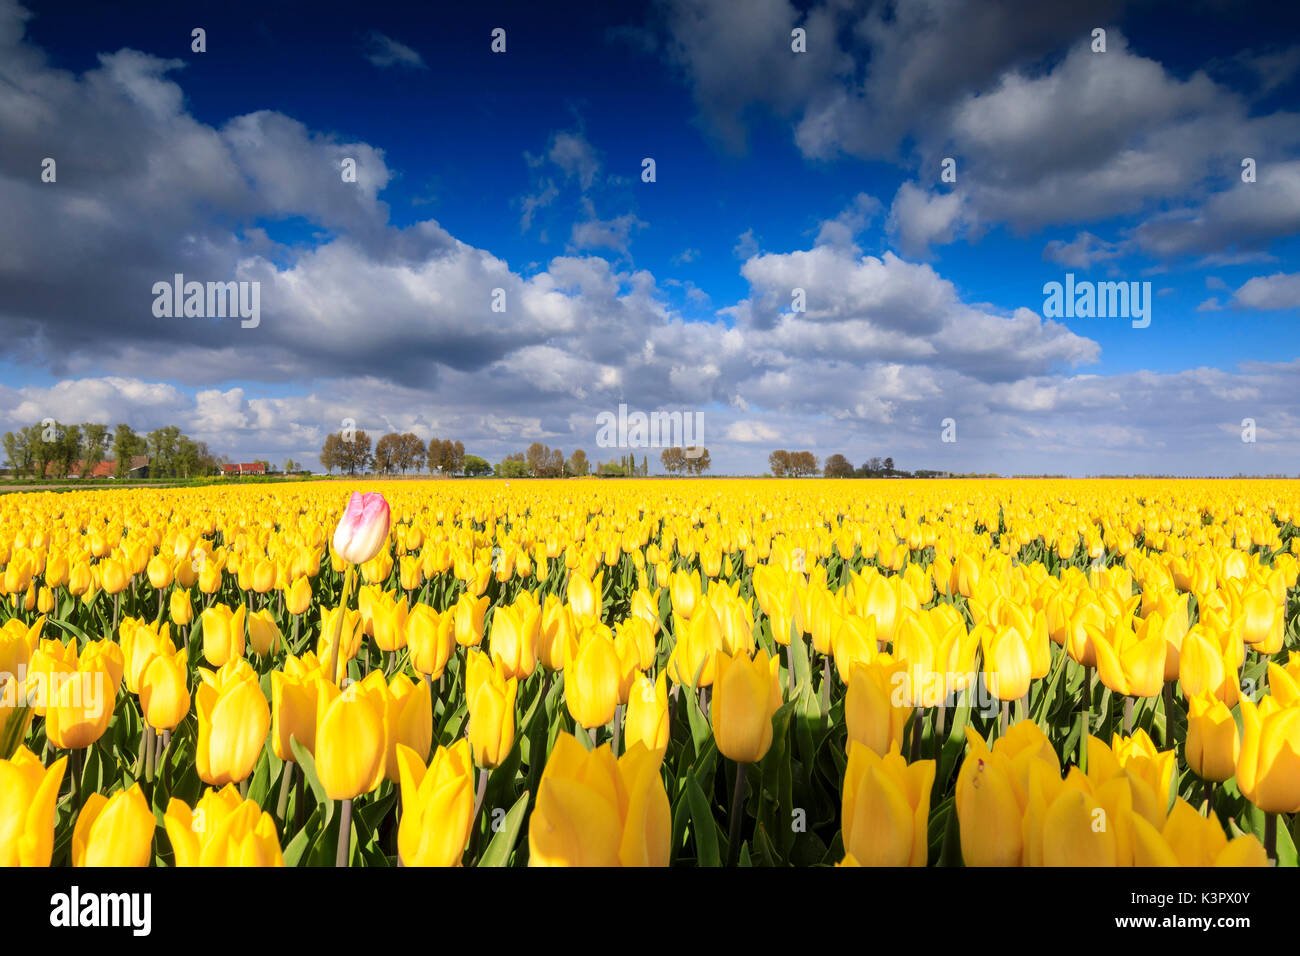 Blue sky and clouds in the fields of yellows tulips in bloom Oude-Tonge Goeree-Overflakkee South Holland The Netherlands Europe Stock Photo